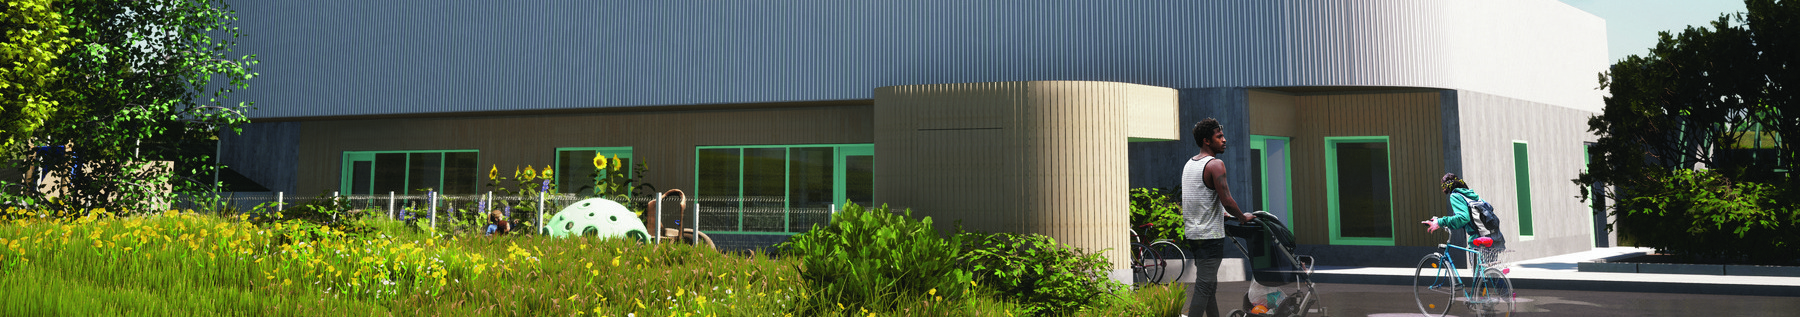 Mahon Park Childcare Centre and Fieldhouse rendering banner.